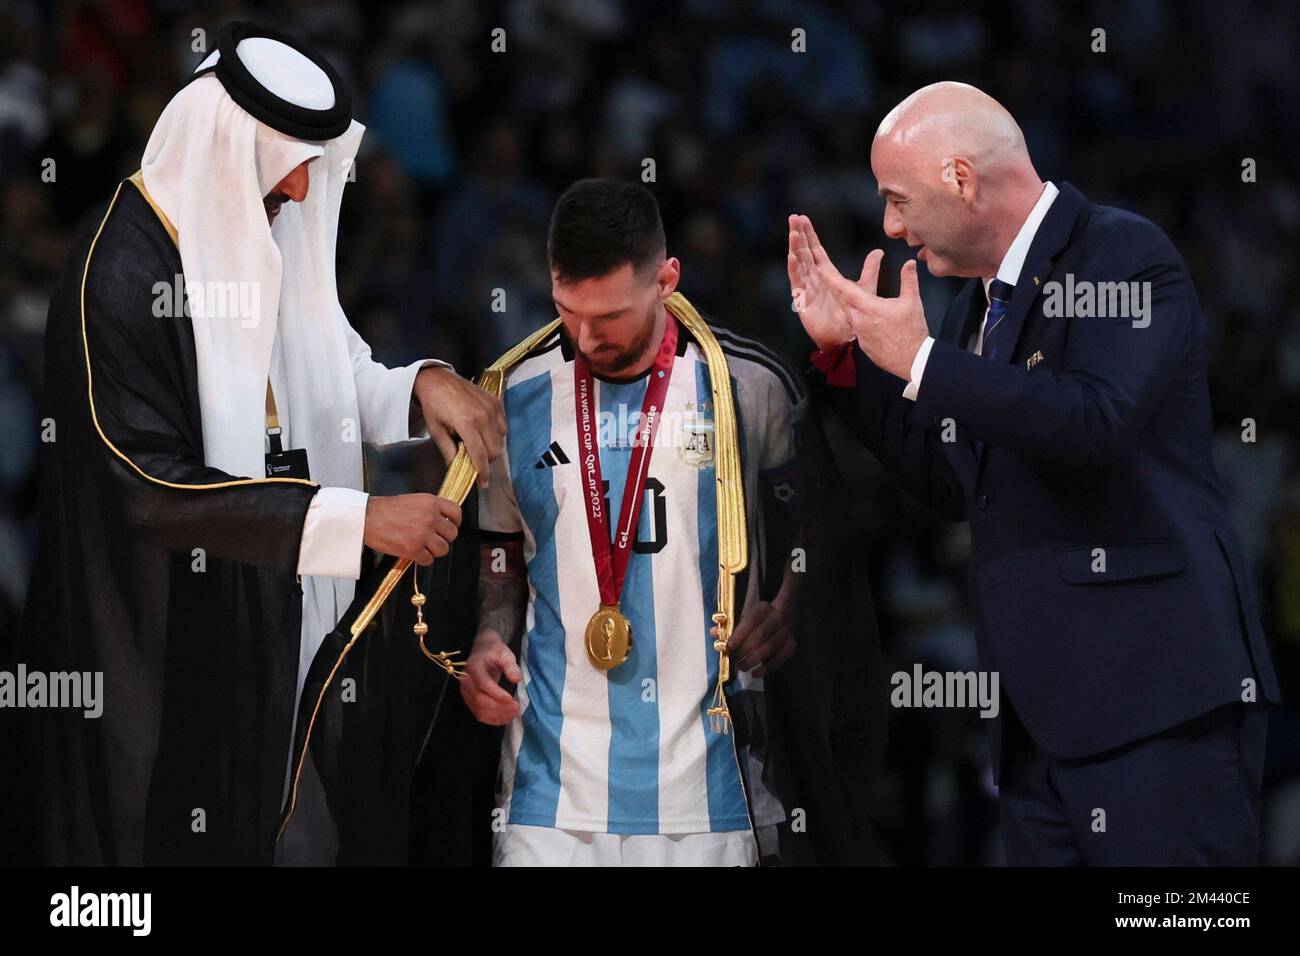 Lusail, Qatar. 18th Dec, 2022. FIFA President Gianni Infantino (R) and The Emir of Qatar Sheikh Tamim bin Hamad Al Thani (L) award Lionel Messi of Argentina during the awarding ceremony of the 2022 FIFA World Cup at Lusail Stadium in Lusail, Qatar, Dec. 18, 2022. Credit: Lan Hongguang/Xinhua/Alamy Live News/Alamy Live News Stock Photo